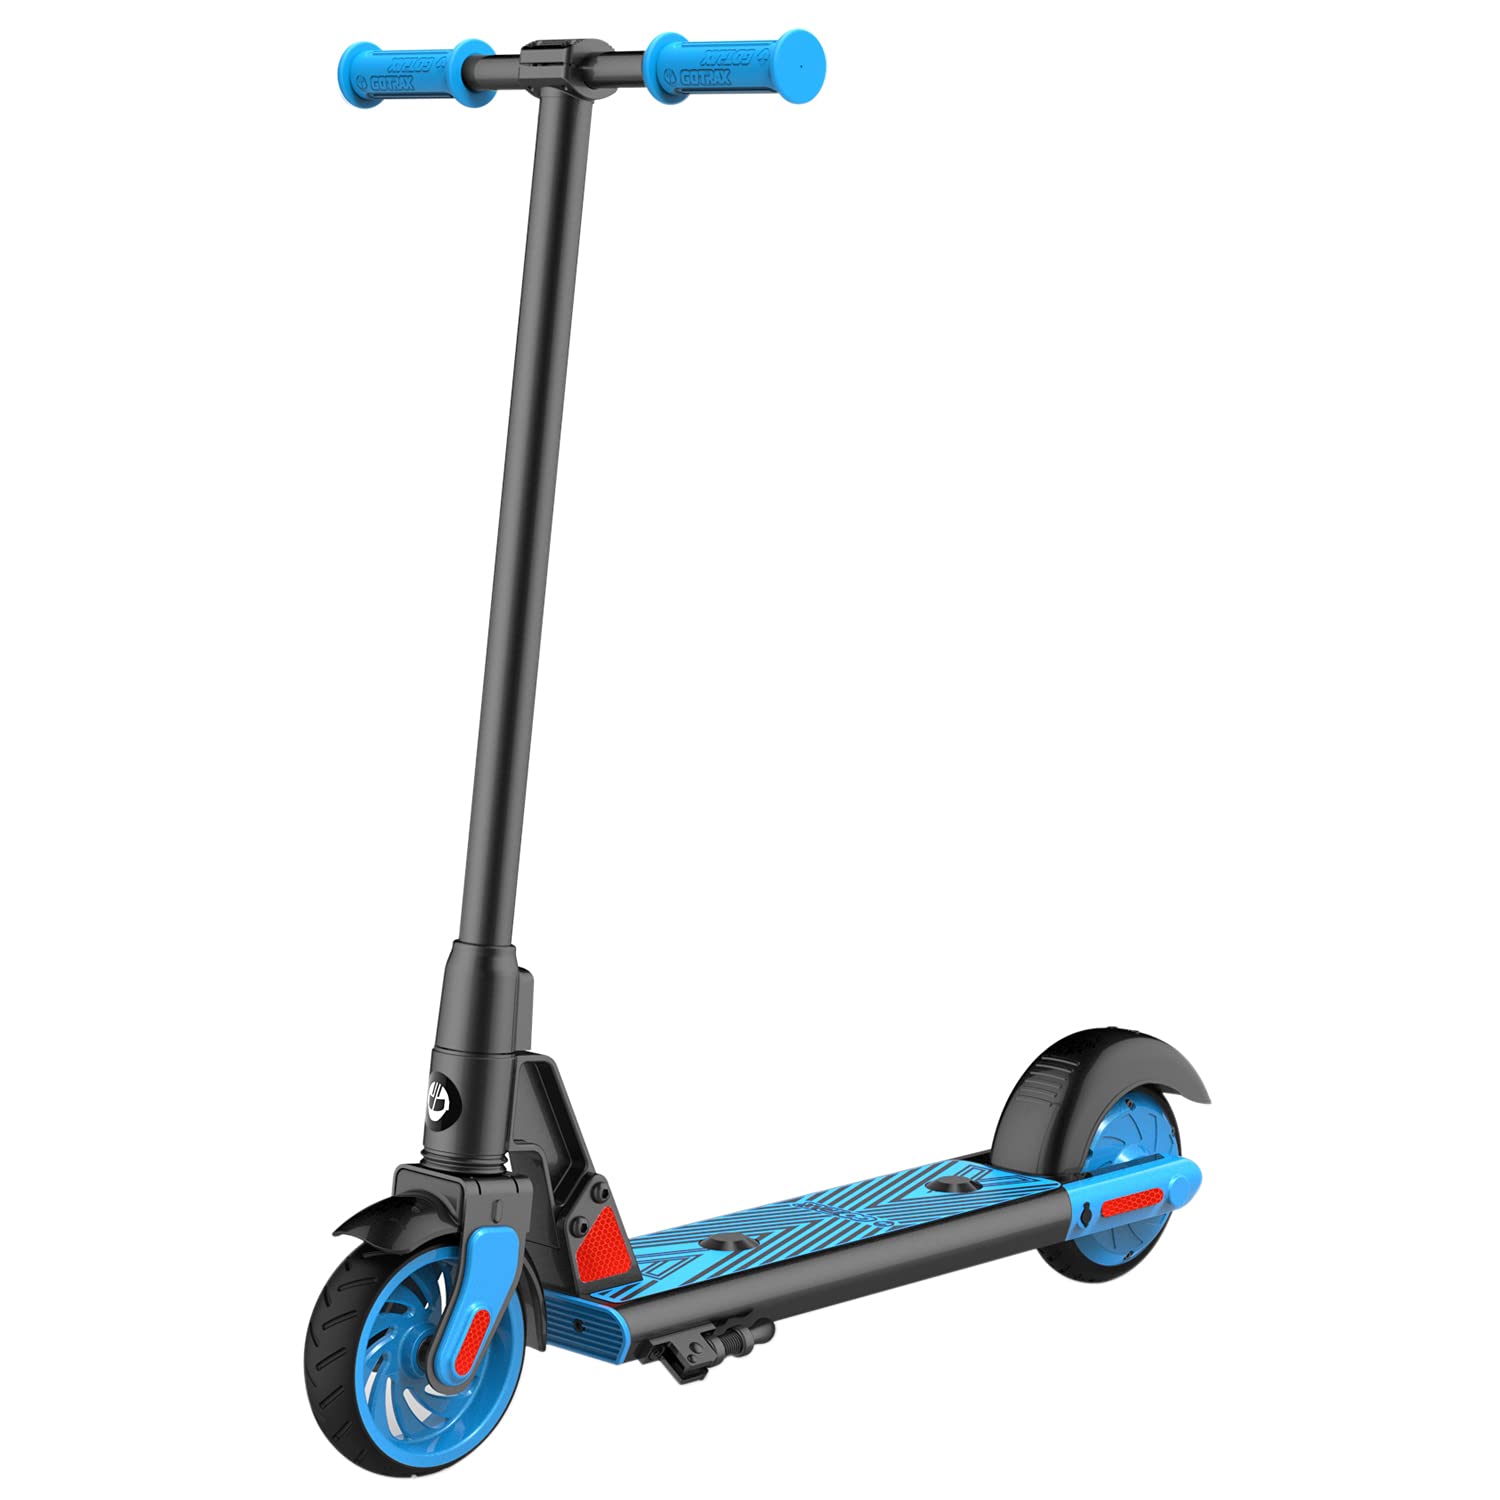 Gotrax GKS Electric Scooter for Kids Age of 6-12, Kick-Start Boost and Gravity Sensor Kids Electric Scooter, 6" Wheels UL Certified E Scooter